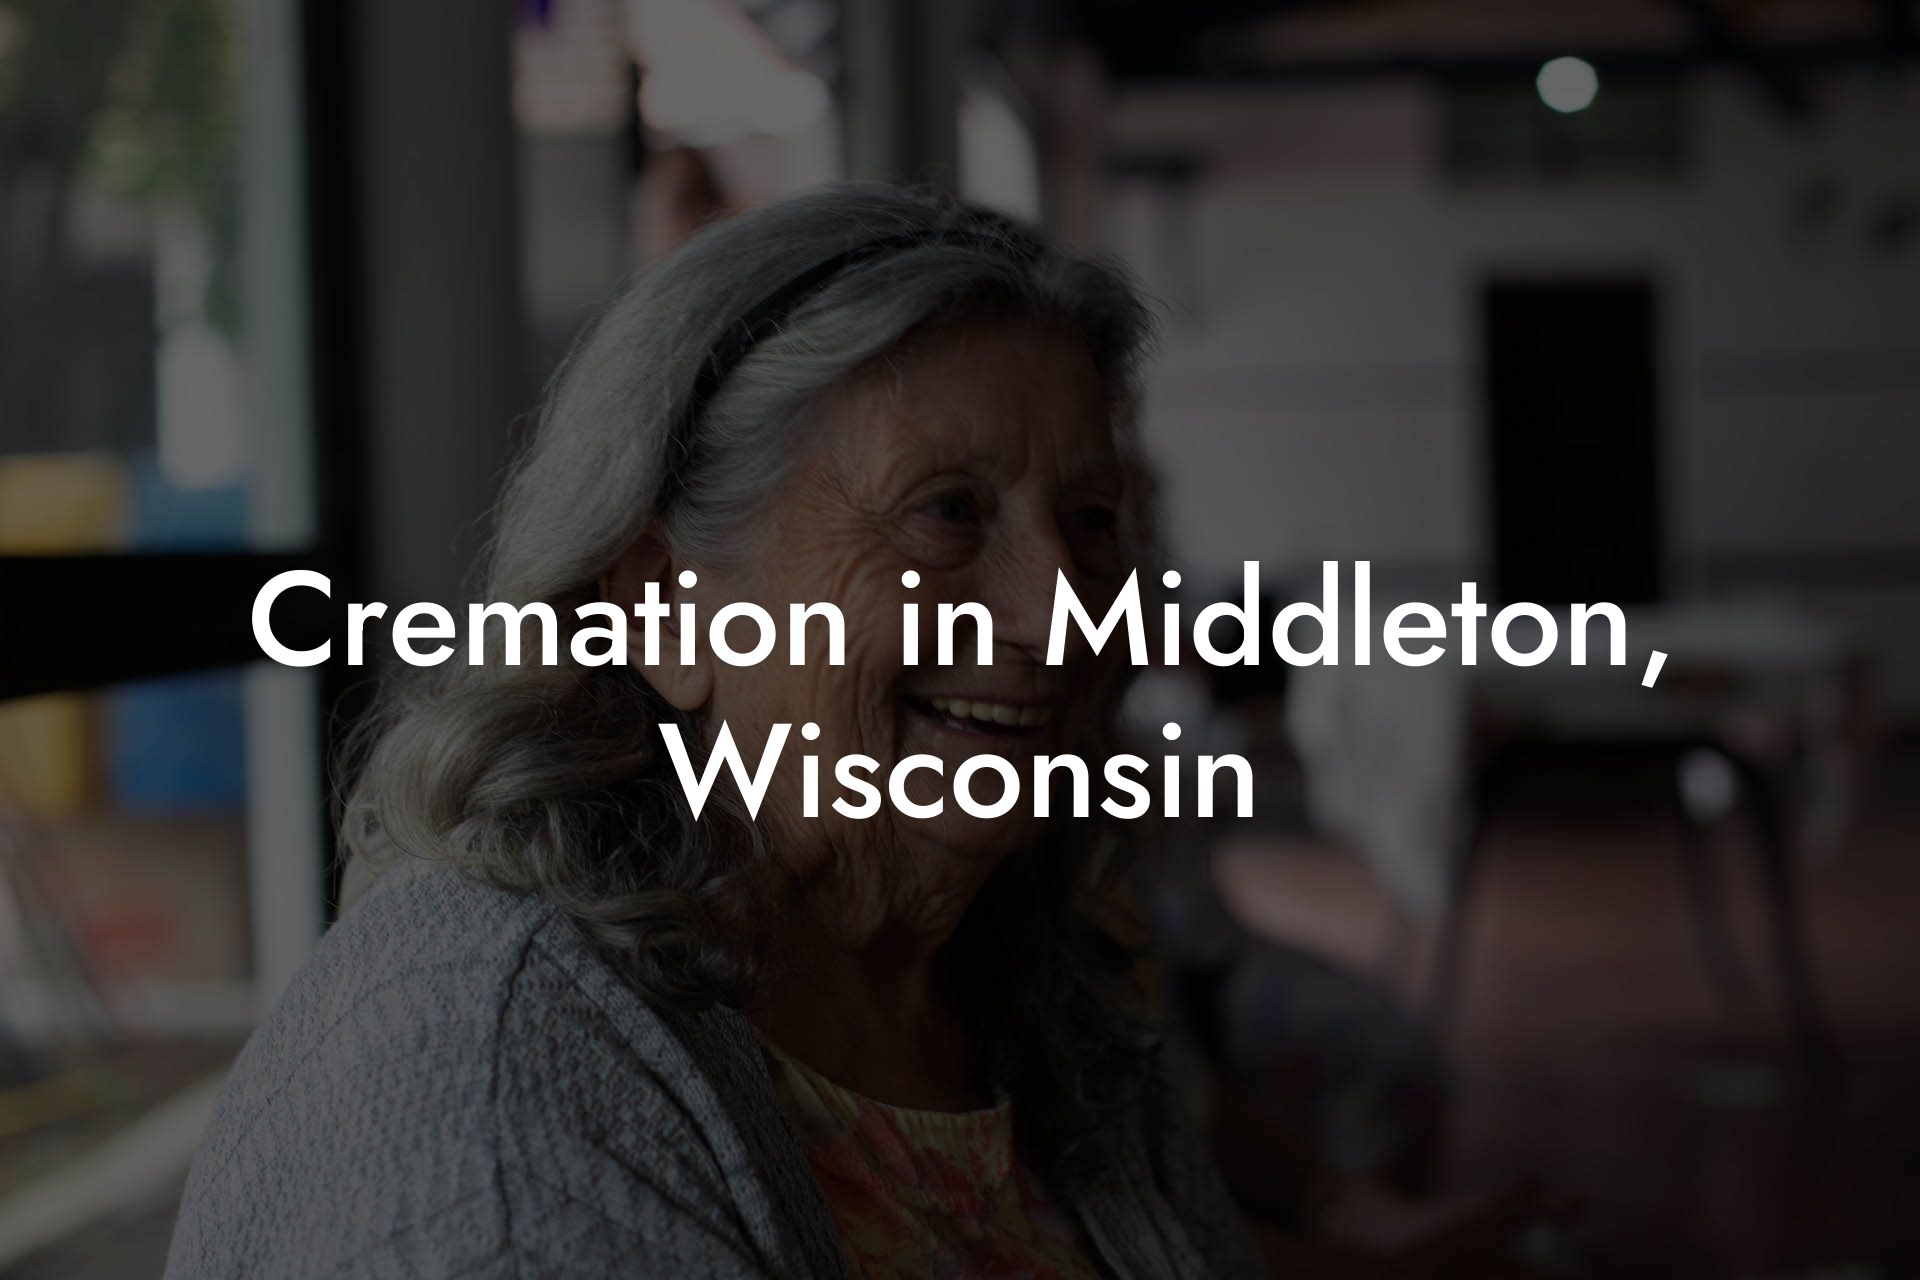 Cremation in Middleton, Wisconsin